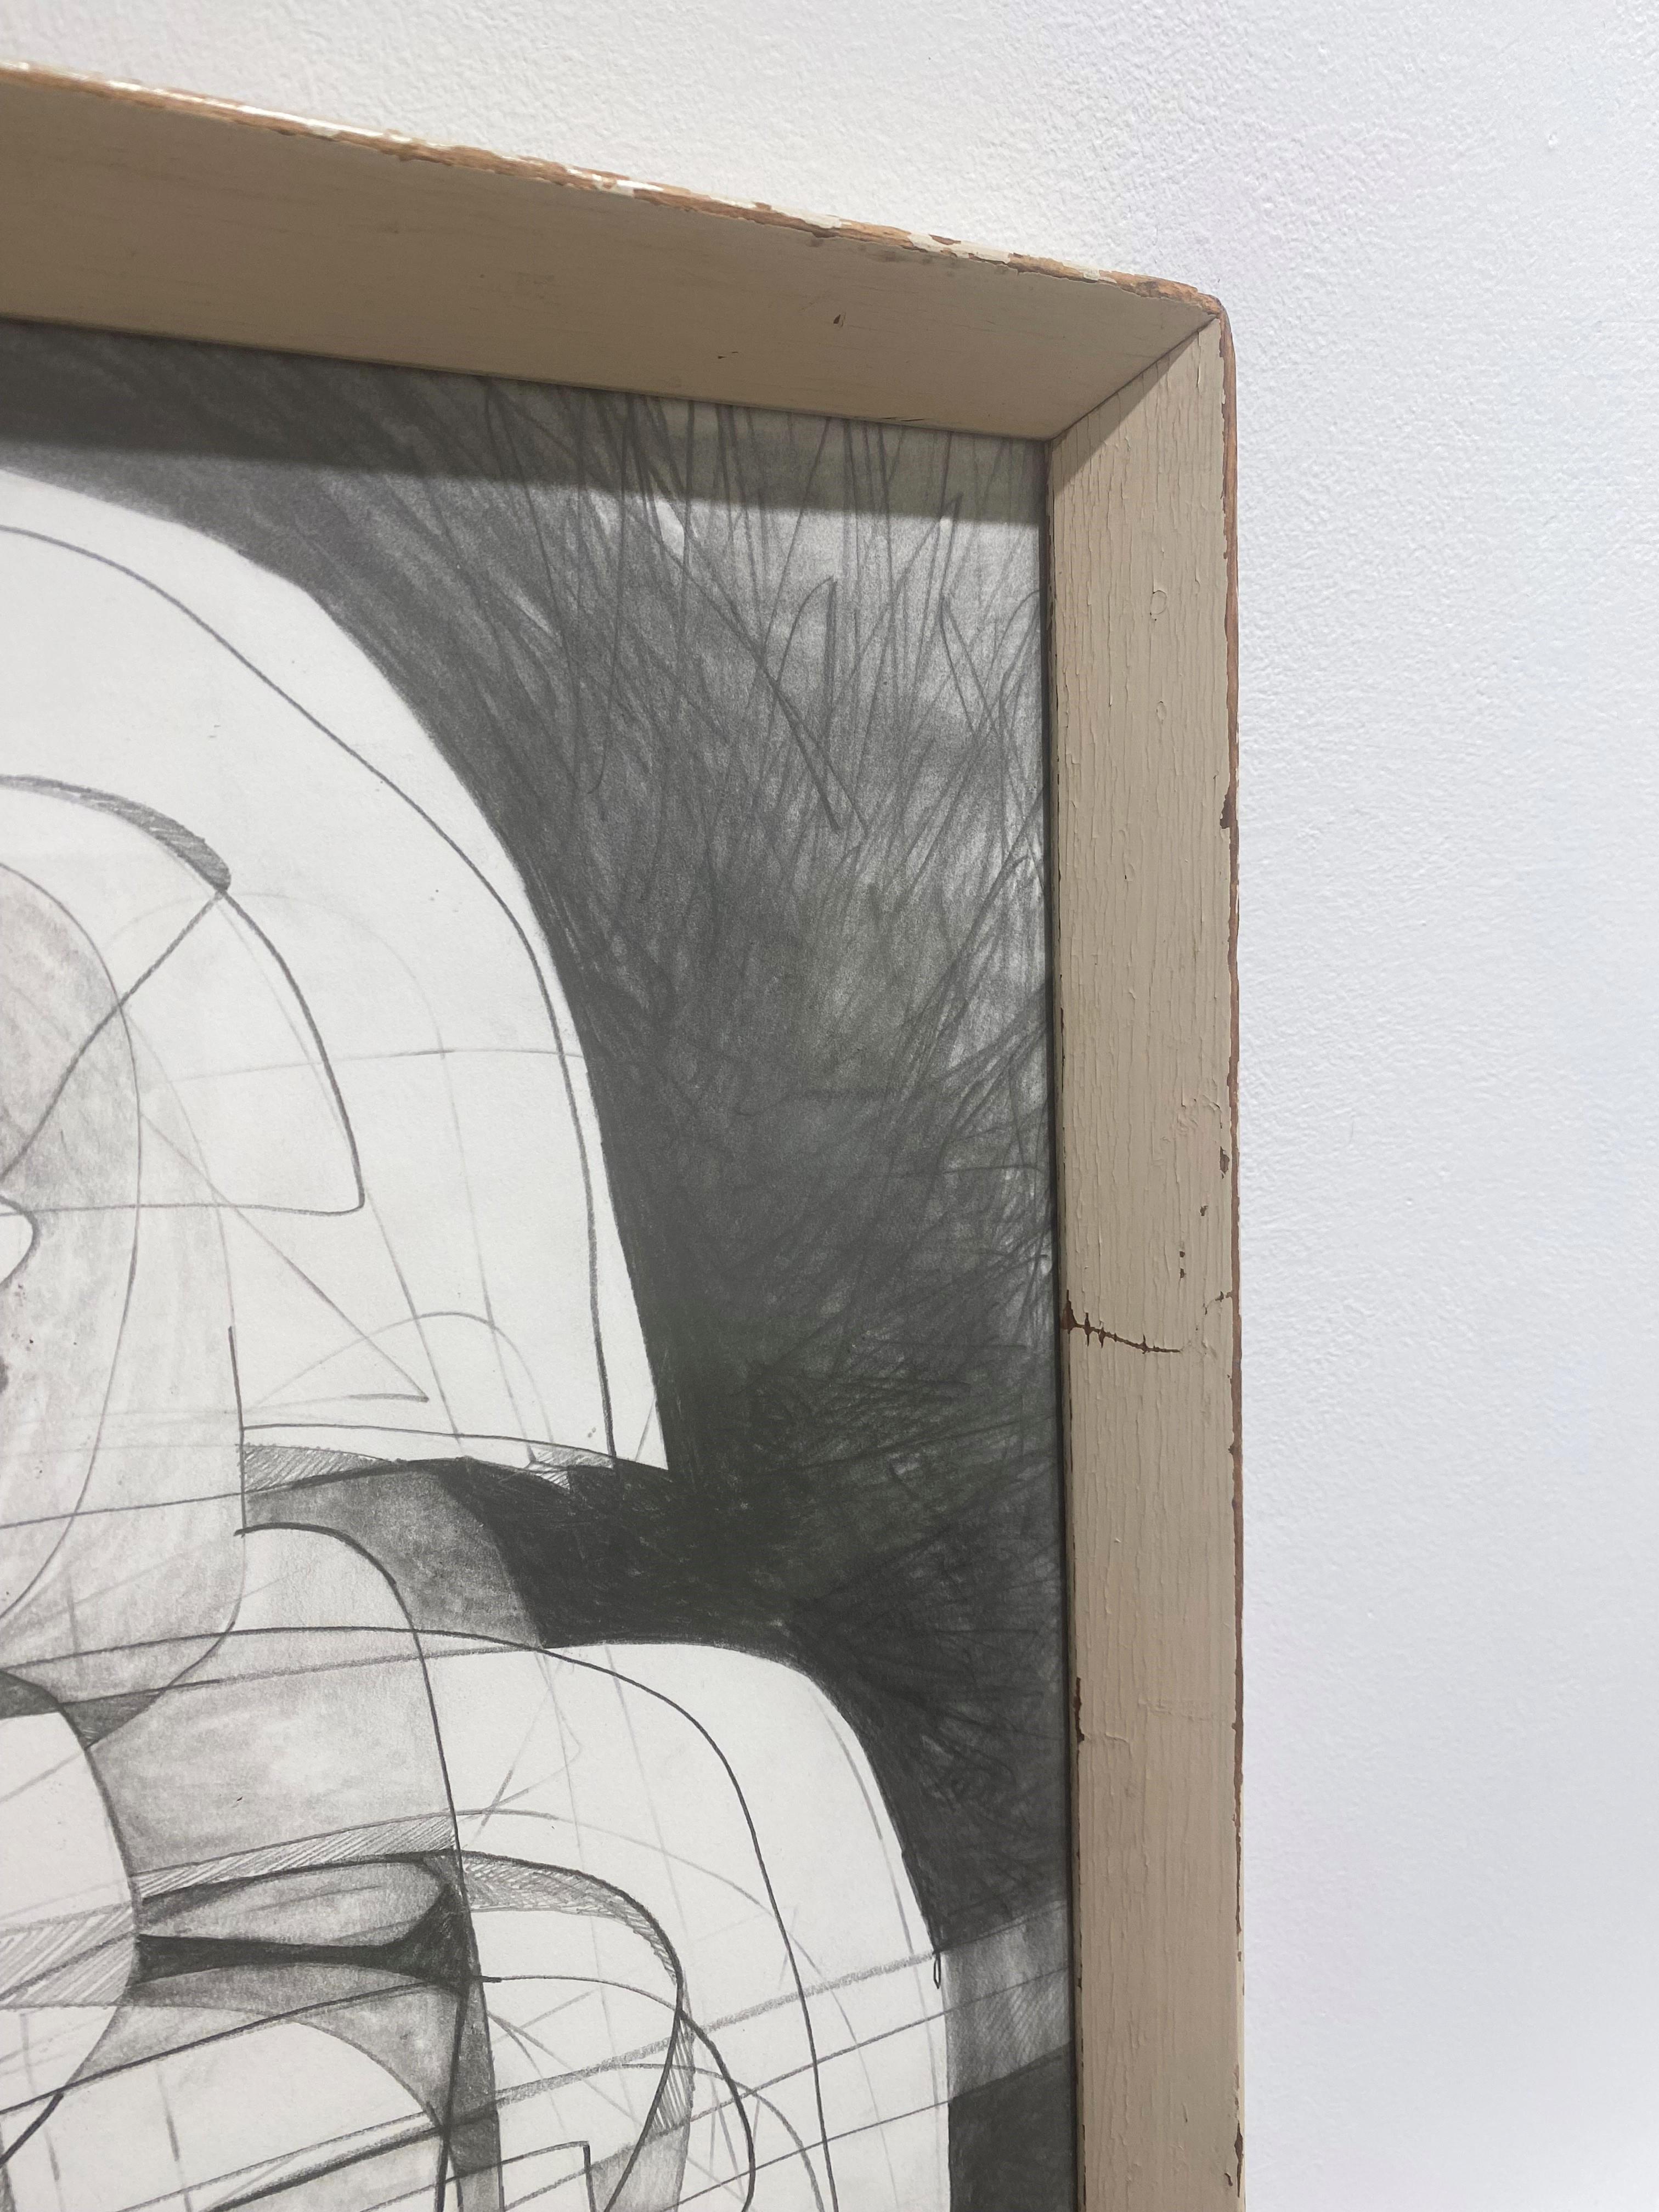 Figurative abstract cubist style drawing inspired by the Infanta Margarita in an antique gold frame 
“Infanta IV” by Hudson Valley artist, David Dew Bruner, made in 2015
23 x 18 inch graphite on paper drawing in a 24.5 x 19.25 inch antique painted